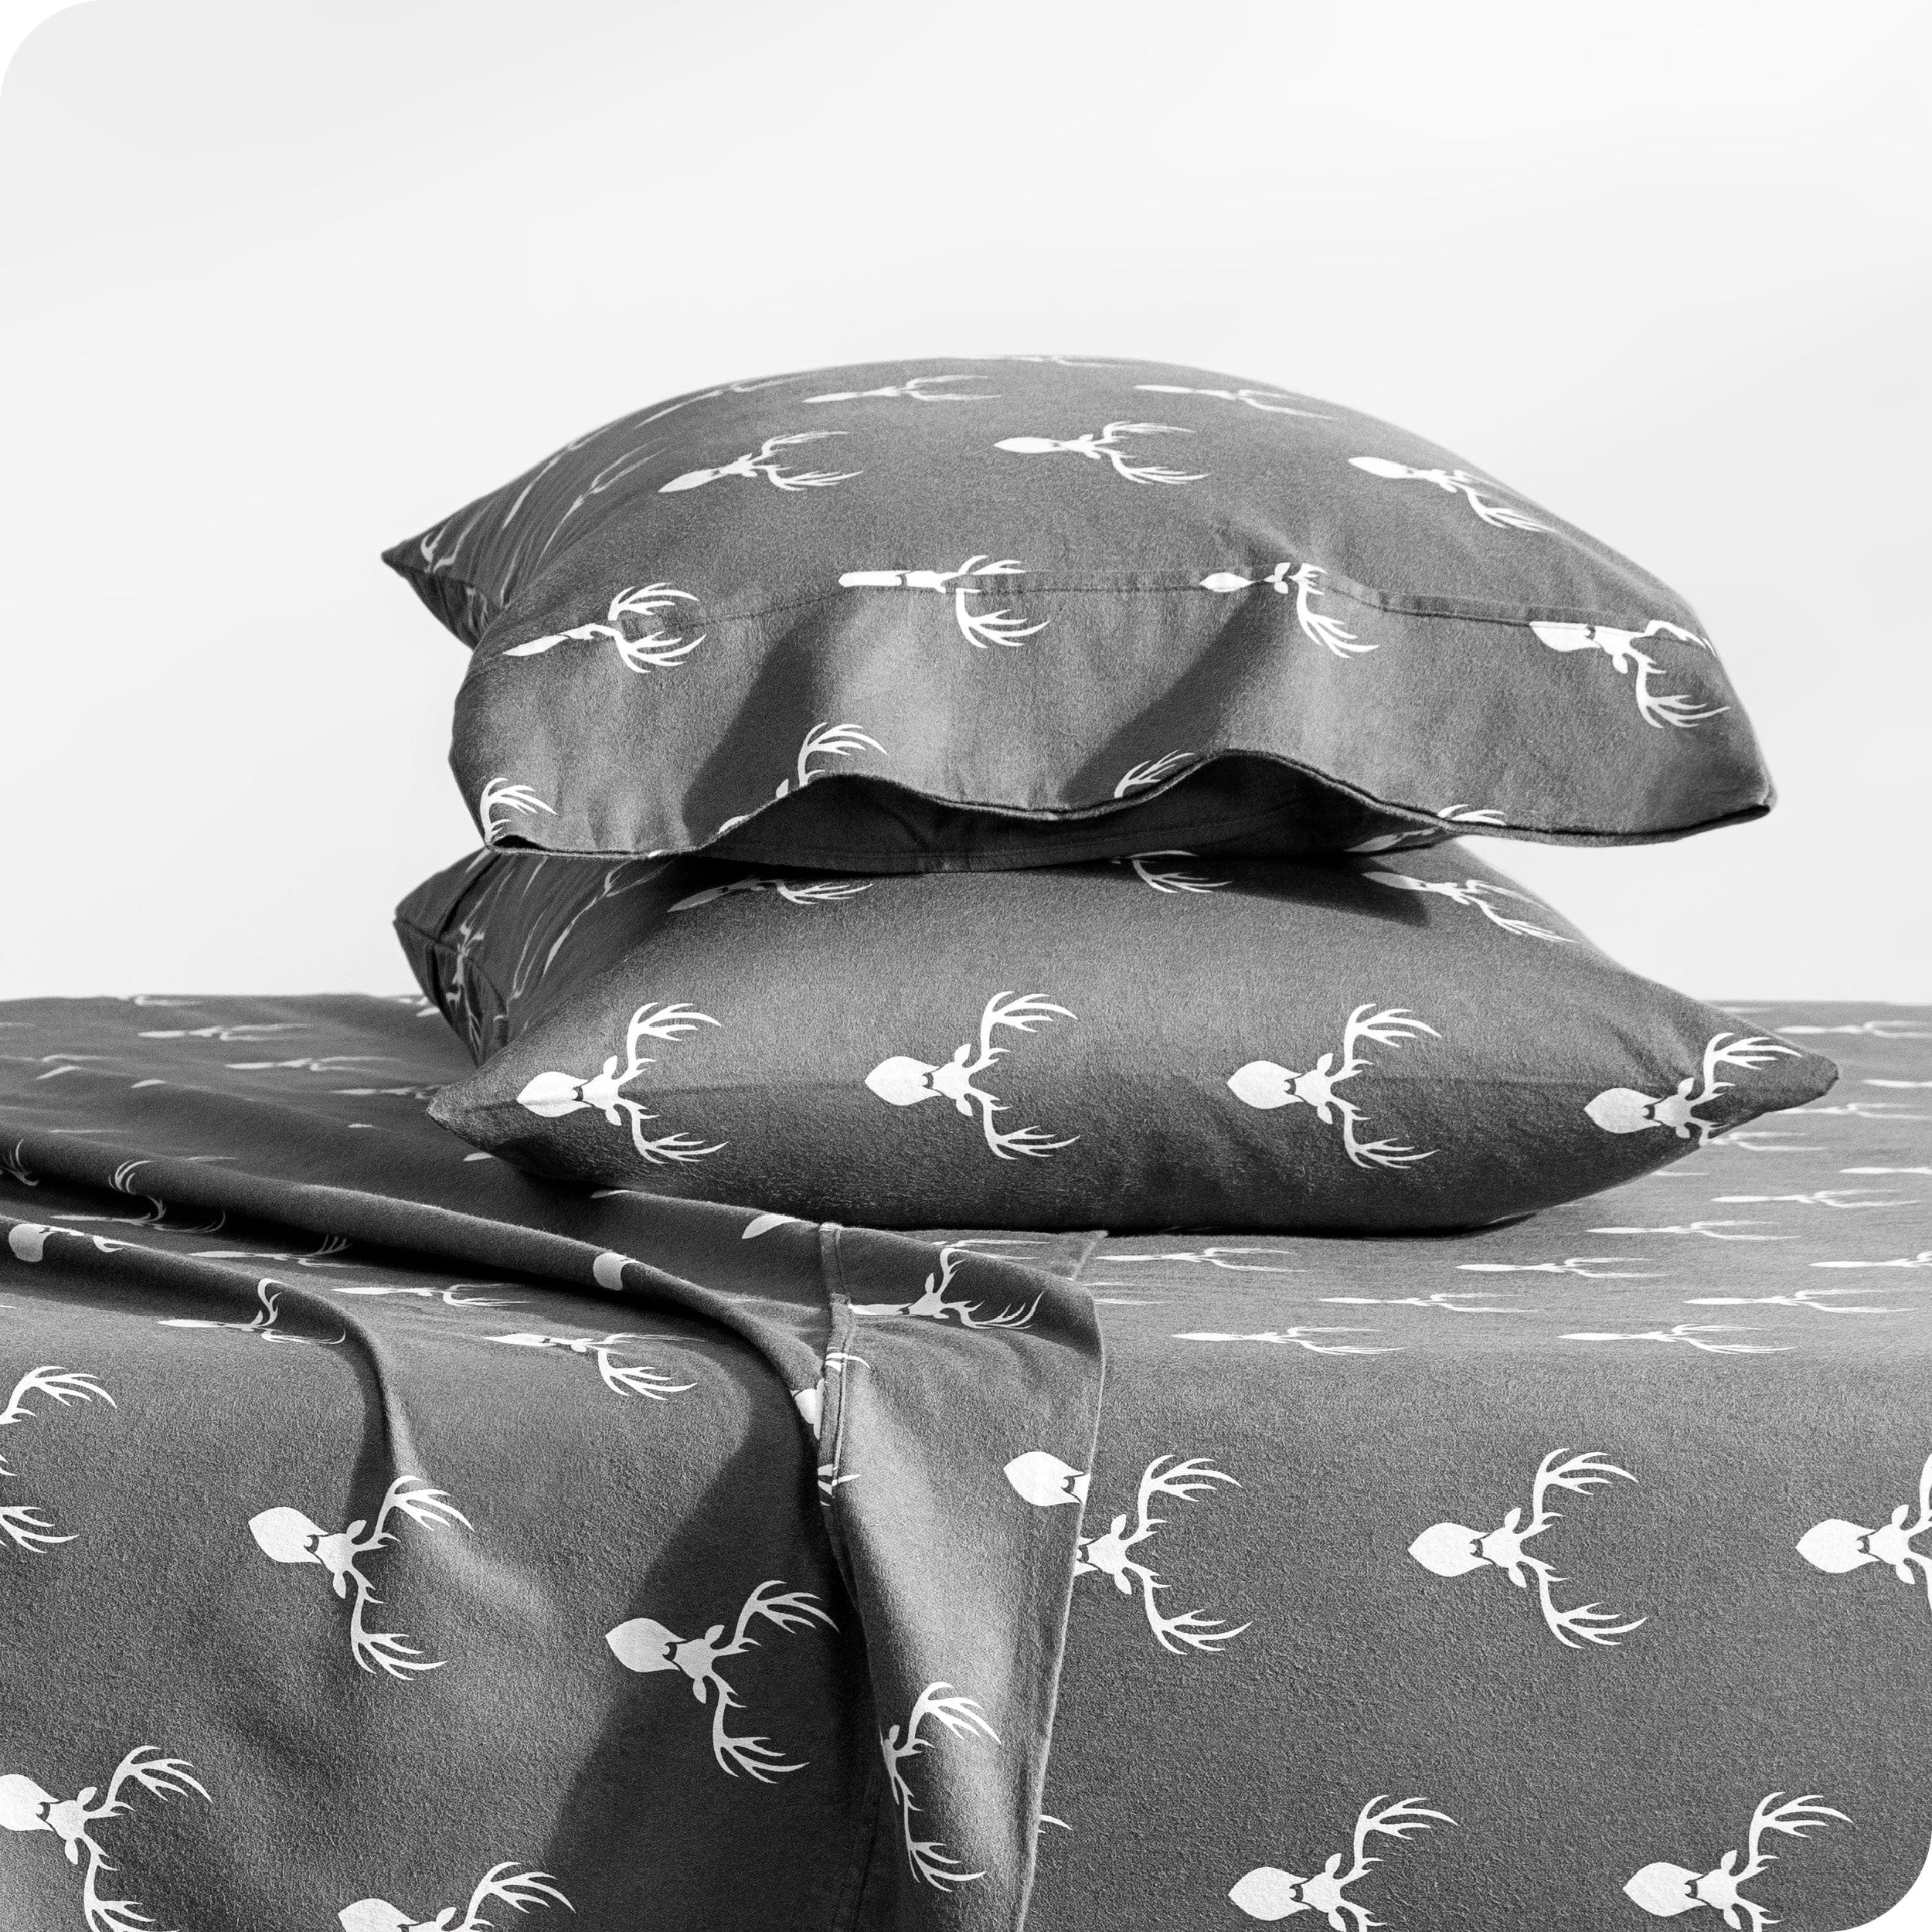 Flannel pillowcase with pillow inside stacked on a bed made with matching flannel sheets